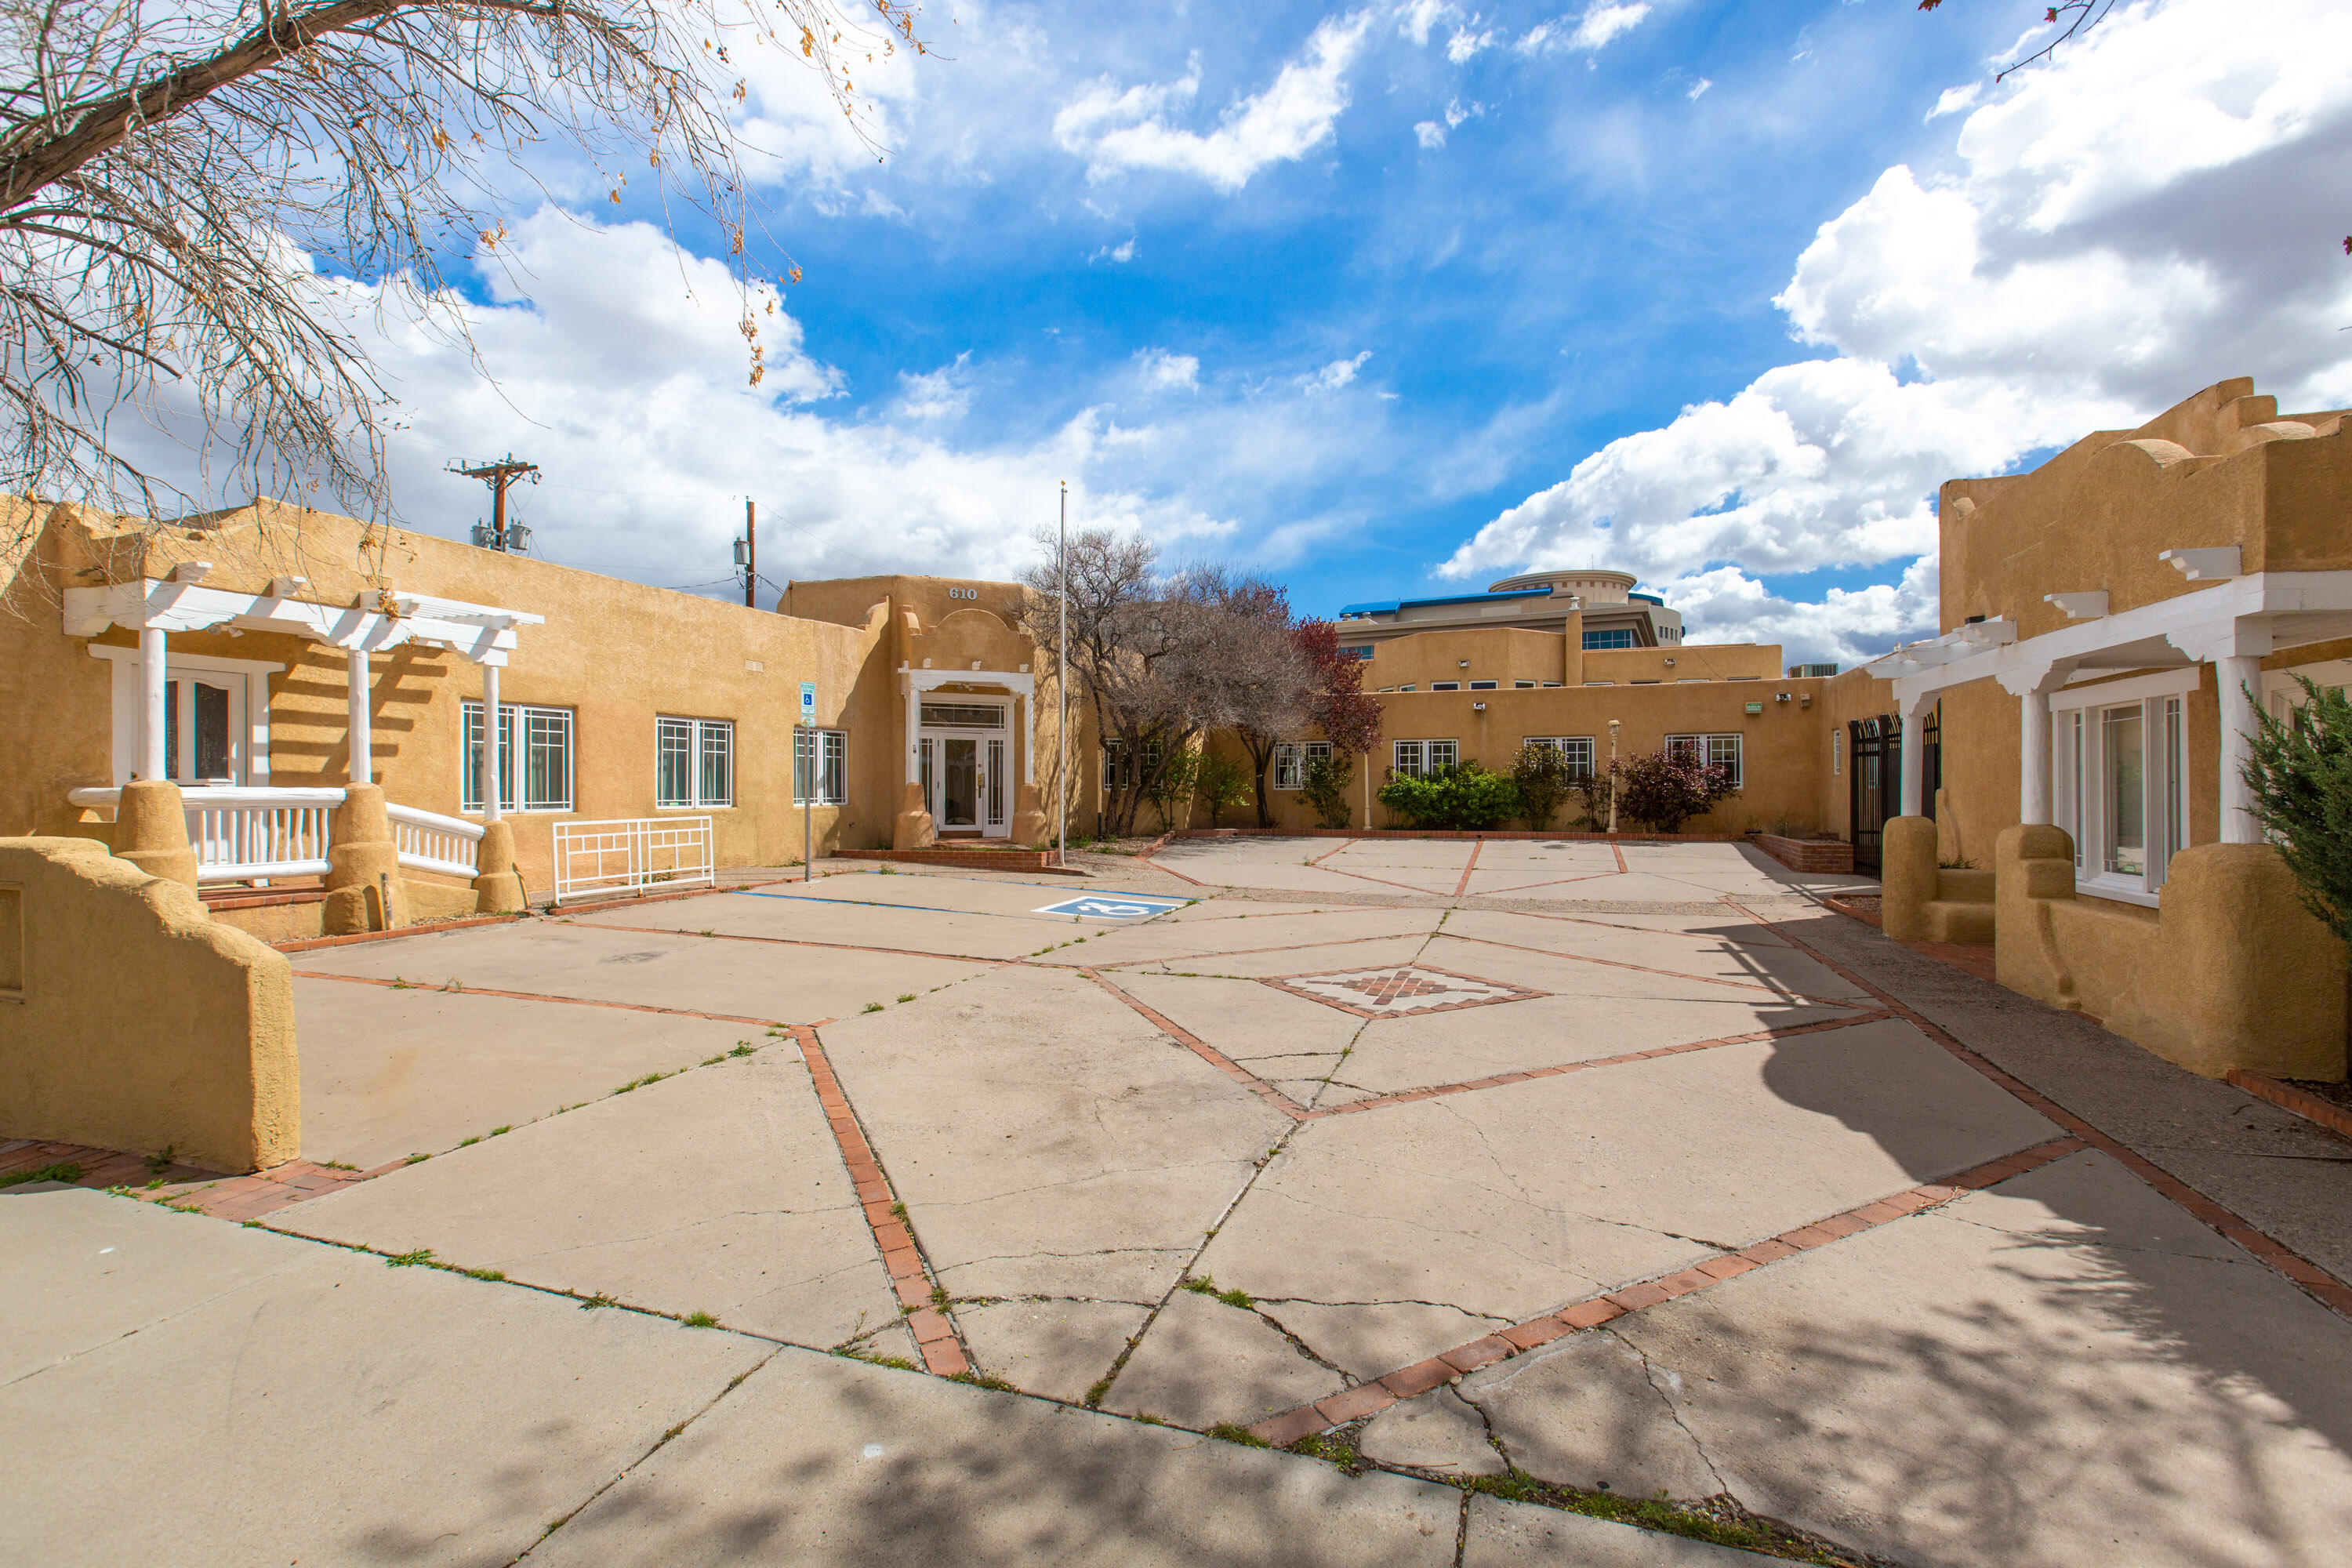 Historic gem in the heart of the downtown! This sprawling suite of offices was converted from four early 1900s pueblo-style homes and served as the headquarters for one of Albuquerque's top law firms for more than 40 years. Ideally located blocks from the Courthouses, this property provides ample off-street parking within a lovely walled courtyard. Currently designed with 8 executive offices, 4 support staff offices, 3 conference rooms, 2 reception areas, 4 bathrooms, 2 basements housing mechanical systems, a break room/kitchen, storage room, and lovely covered and gated patio, this property is ready for move in or reconfiguration to fit any need. This unique property is priced below appraised value and ready for a new enterprise!